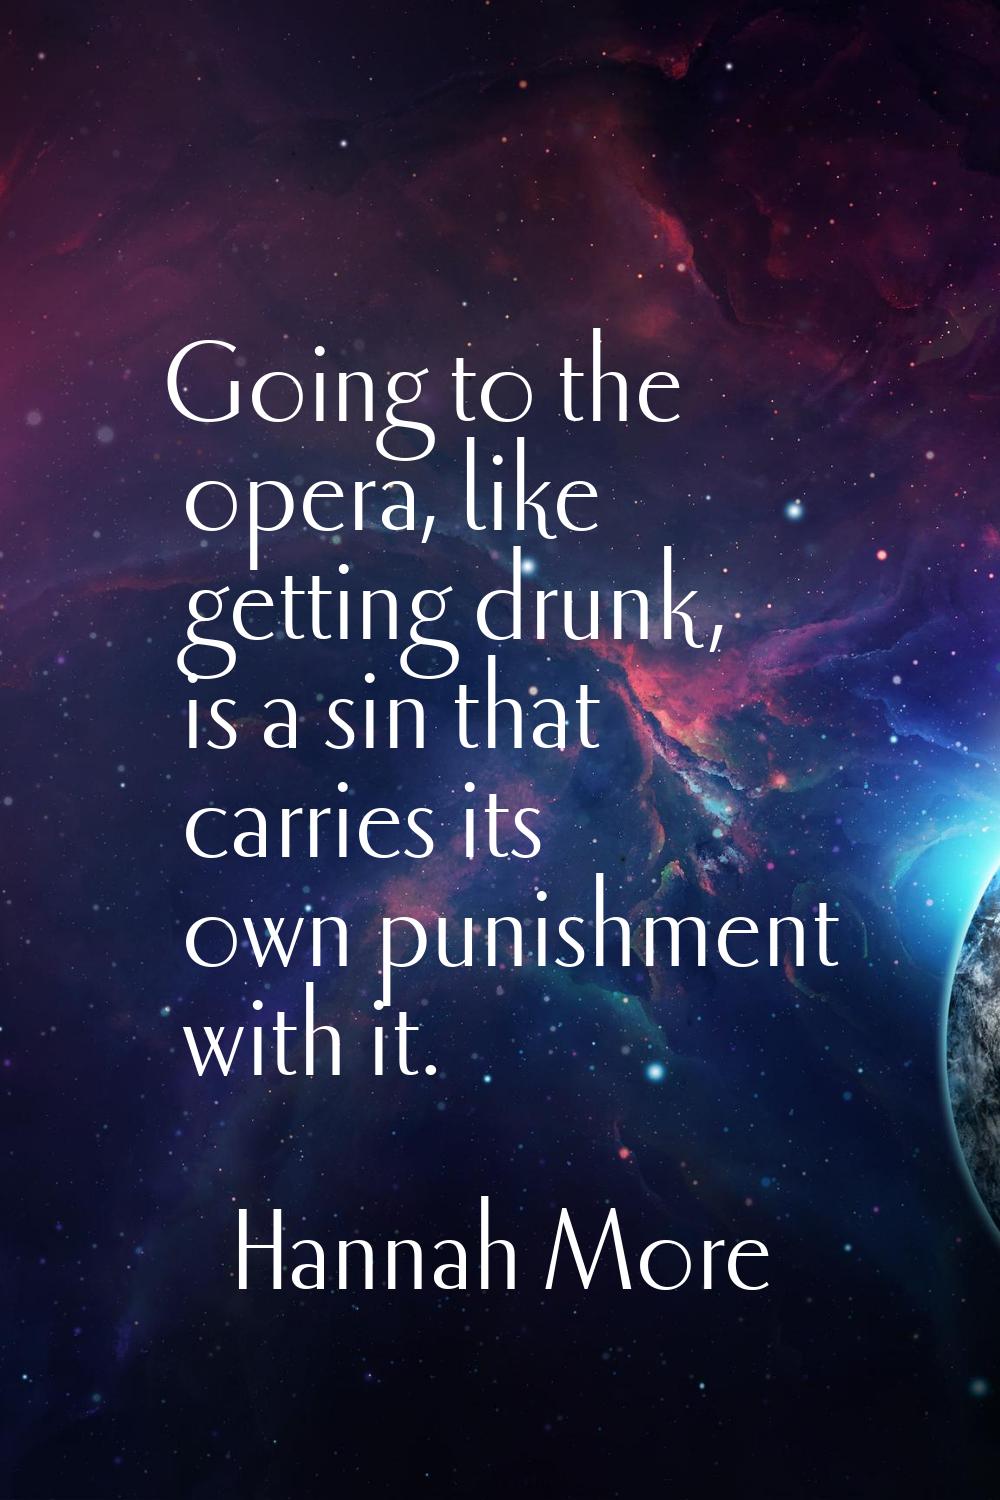 Going to the opera, like getting drunk, is a sin that carries its own punishment with it.